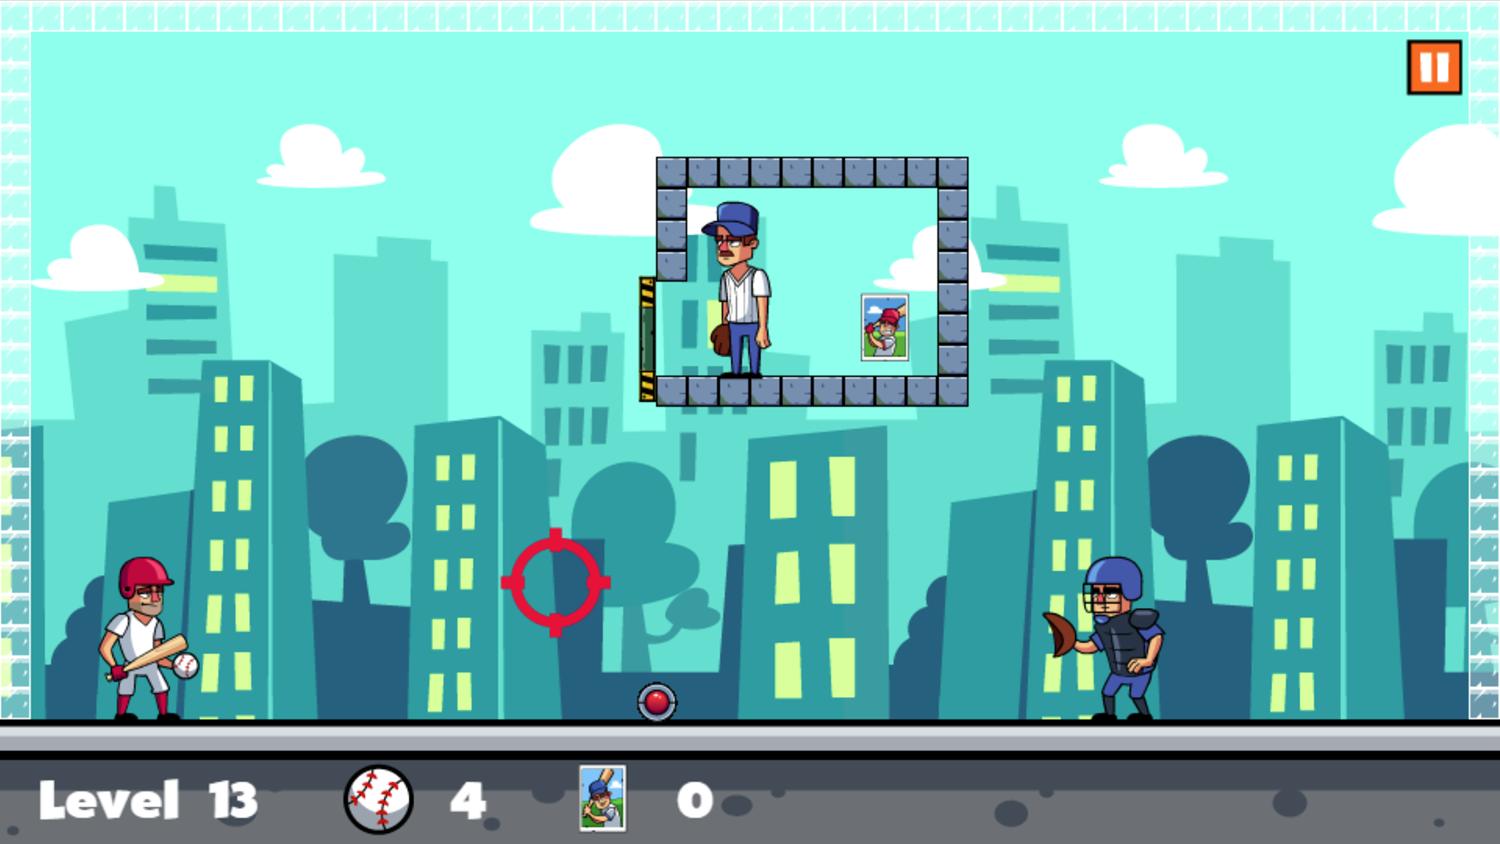 Extreme Baseball Game Level With a Switch Screenshot.